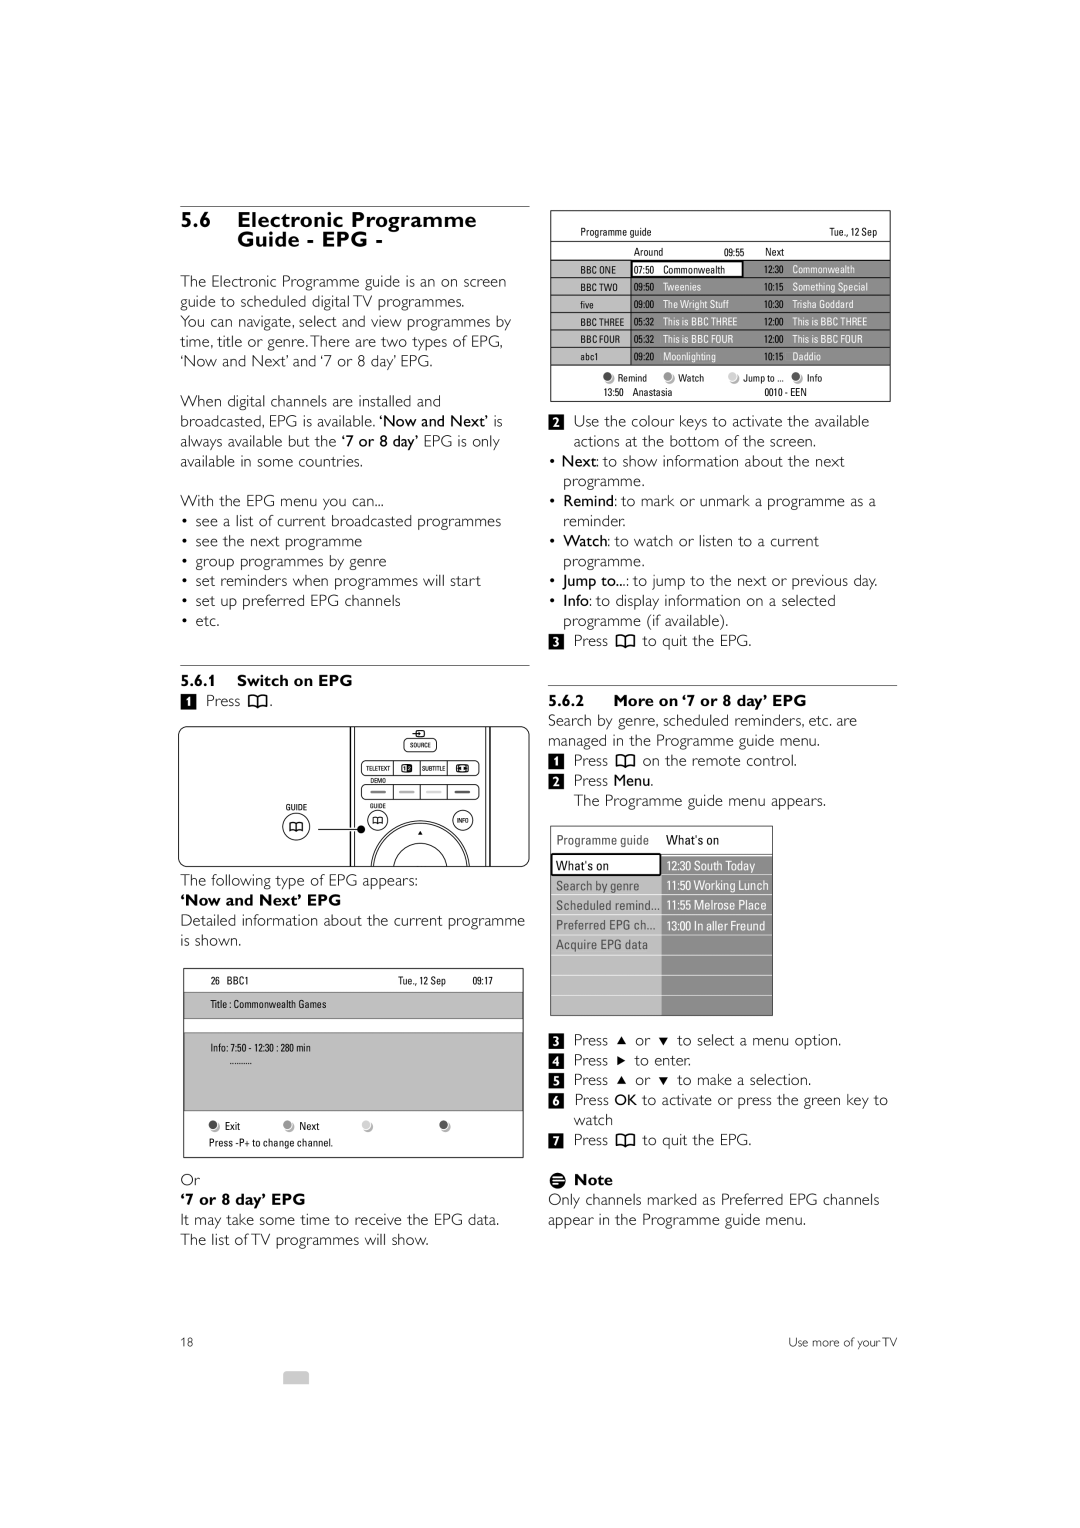 Philips 37PFL7403 manual Electronic Programme Guide - EPG, Switch on EPG, ‘Now and Next’ EPG, ‘7 or 8 day’ EPG, rNote 